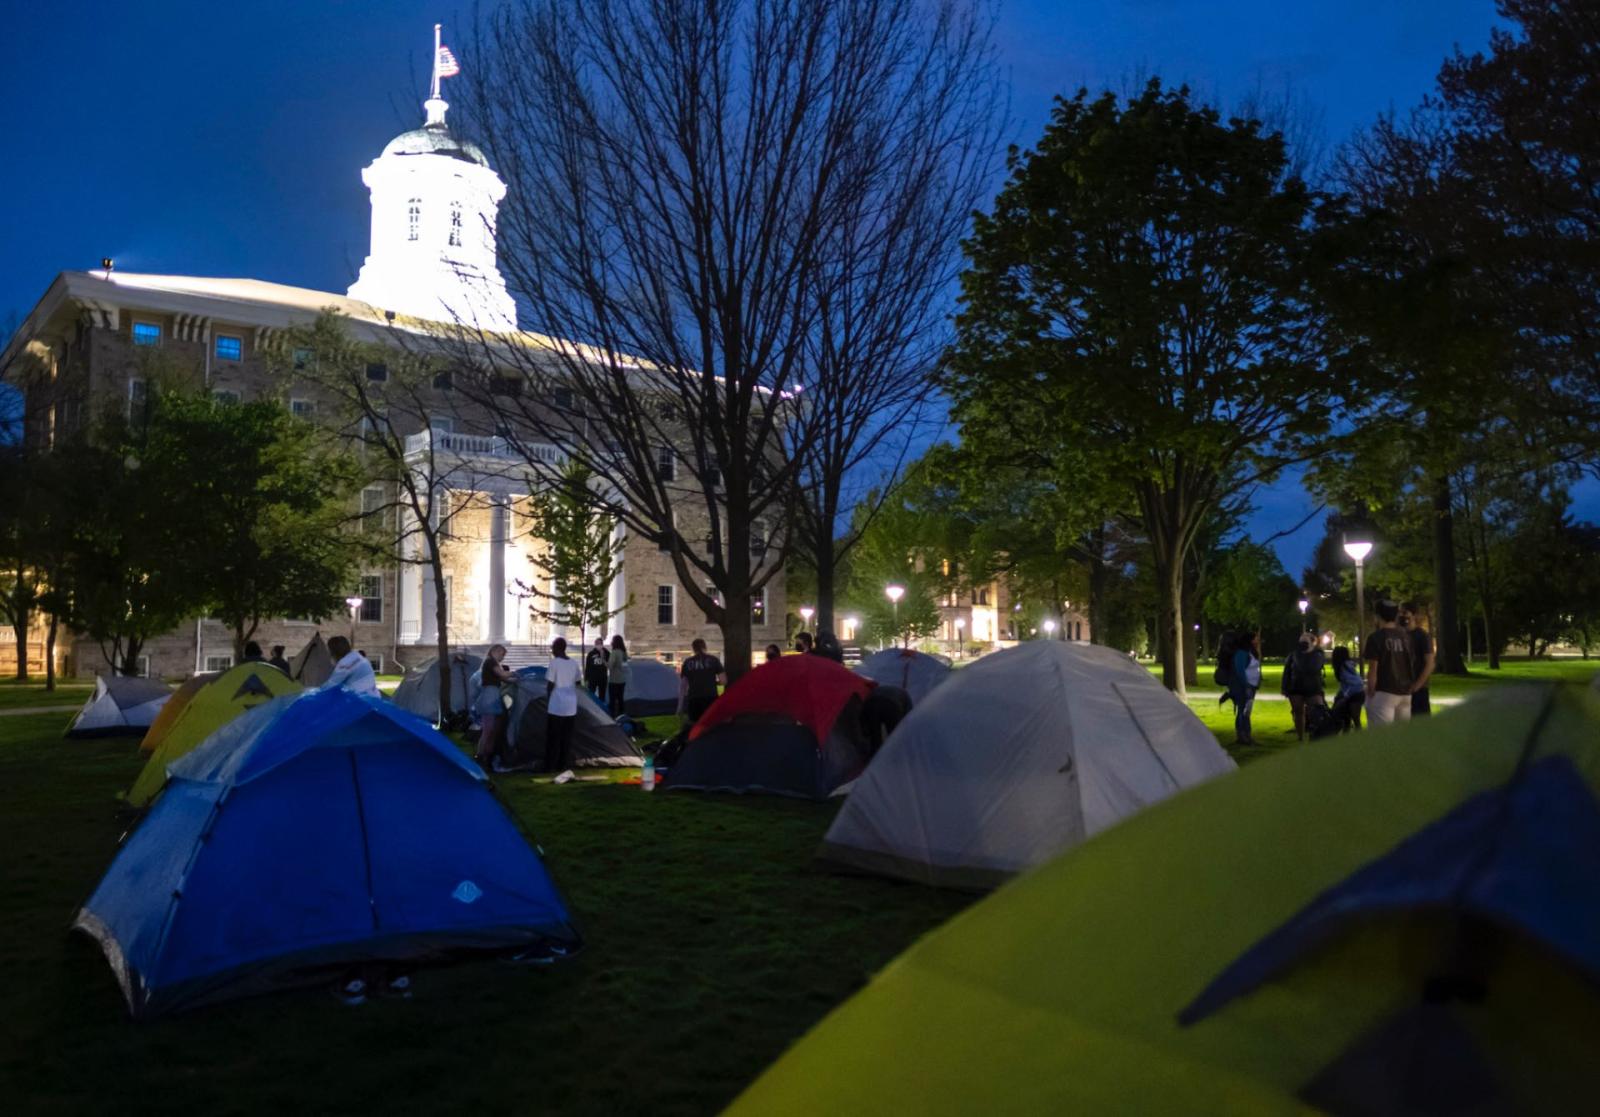 Colorful tents set up on Main Hall Green in front of a lit up Main Hall while students chat and help each other set up tents.